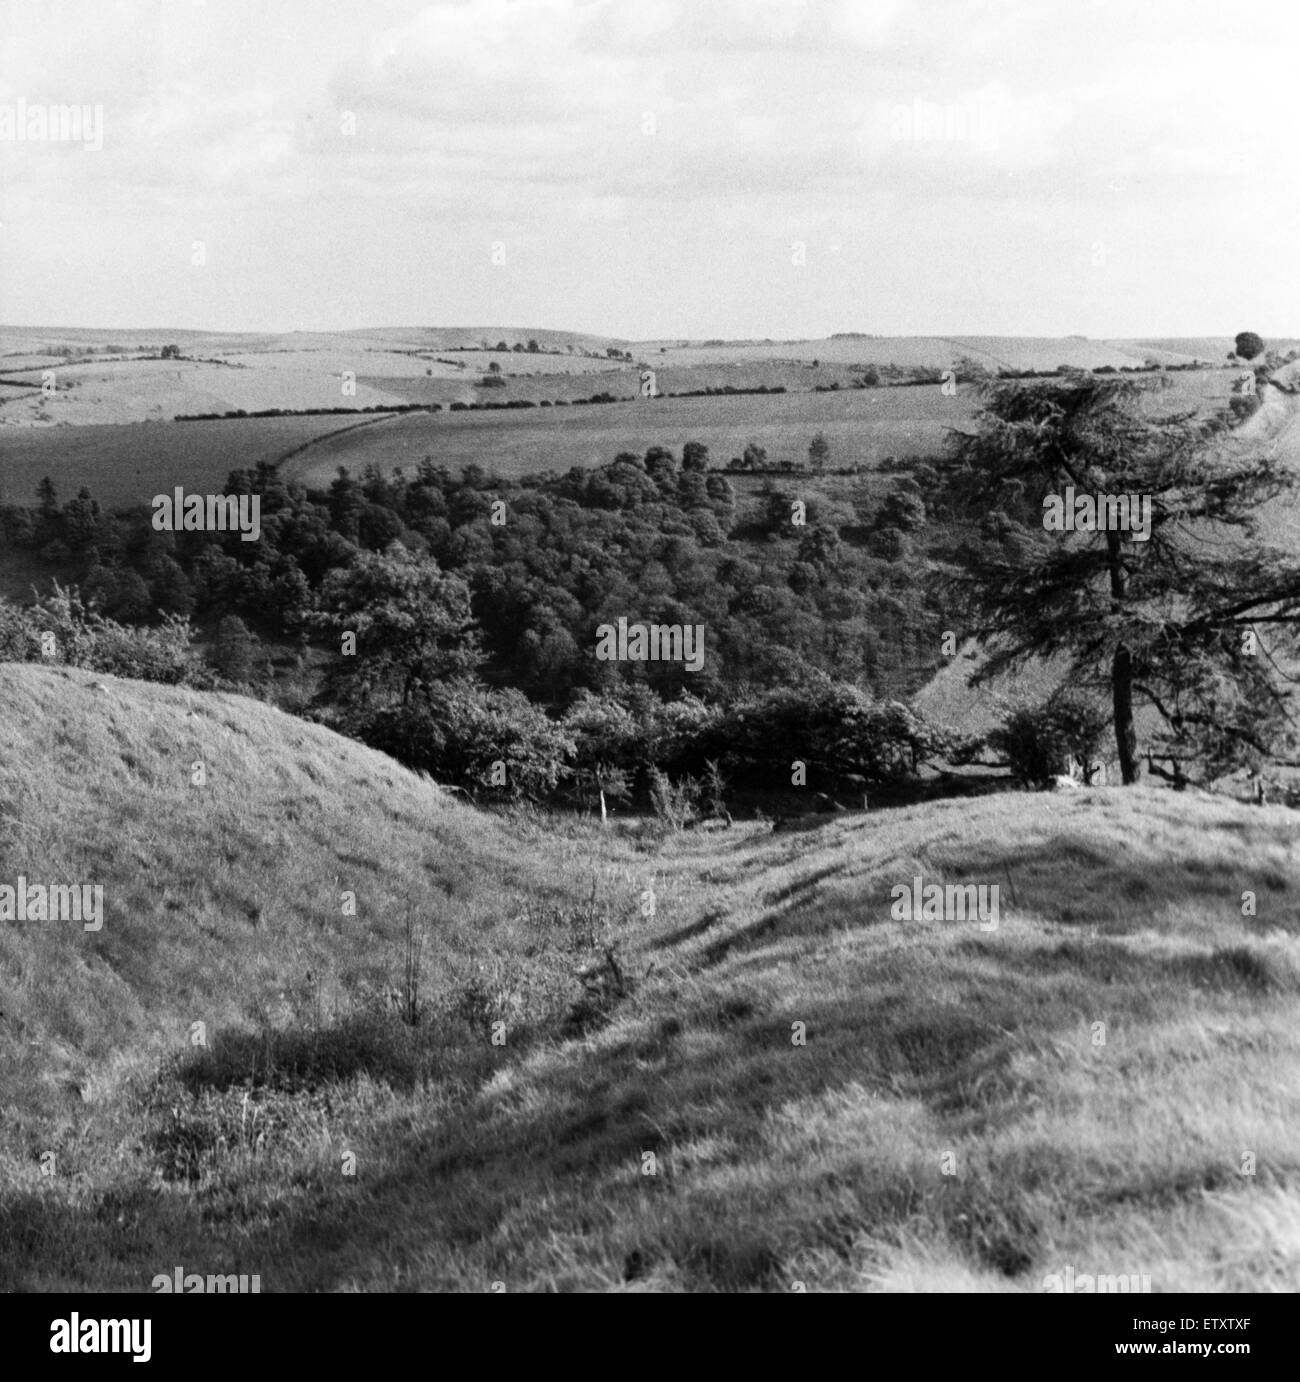 Offa's Dyke is a large linear earthwork that roughly follows the current border between England and Wales. A fine stretch of Dyke on Mainstone Hill. Circa 1950. Stock Photo